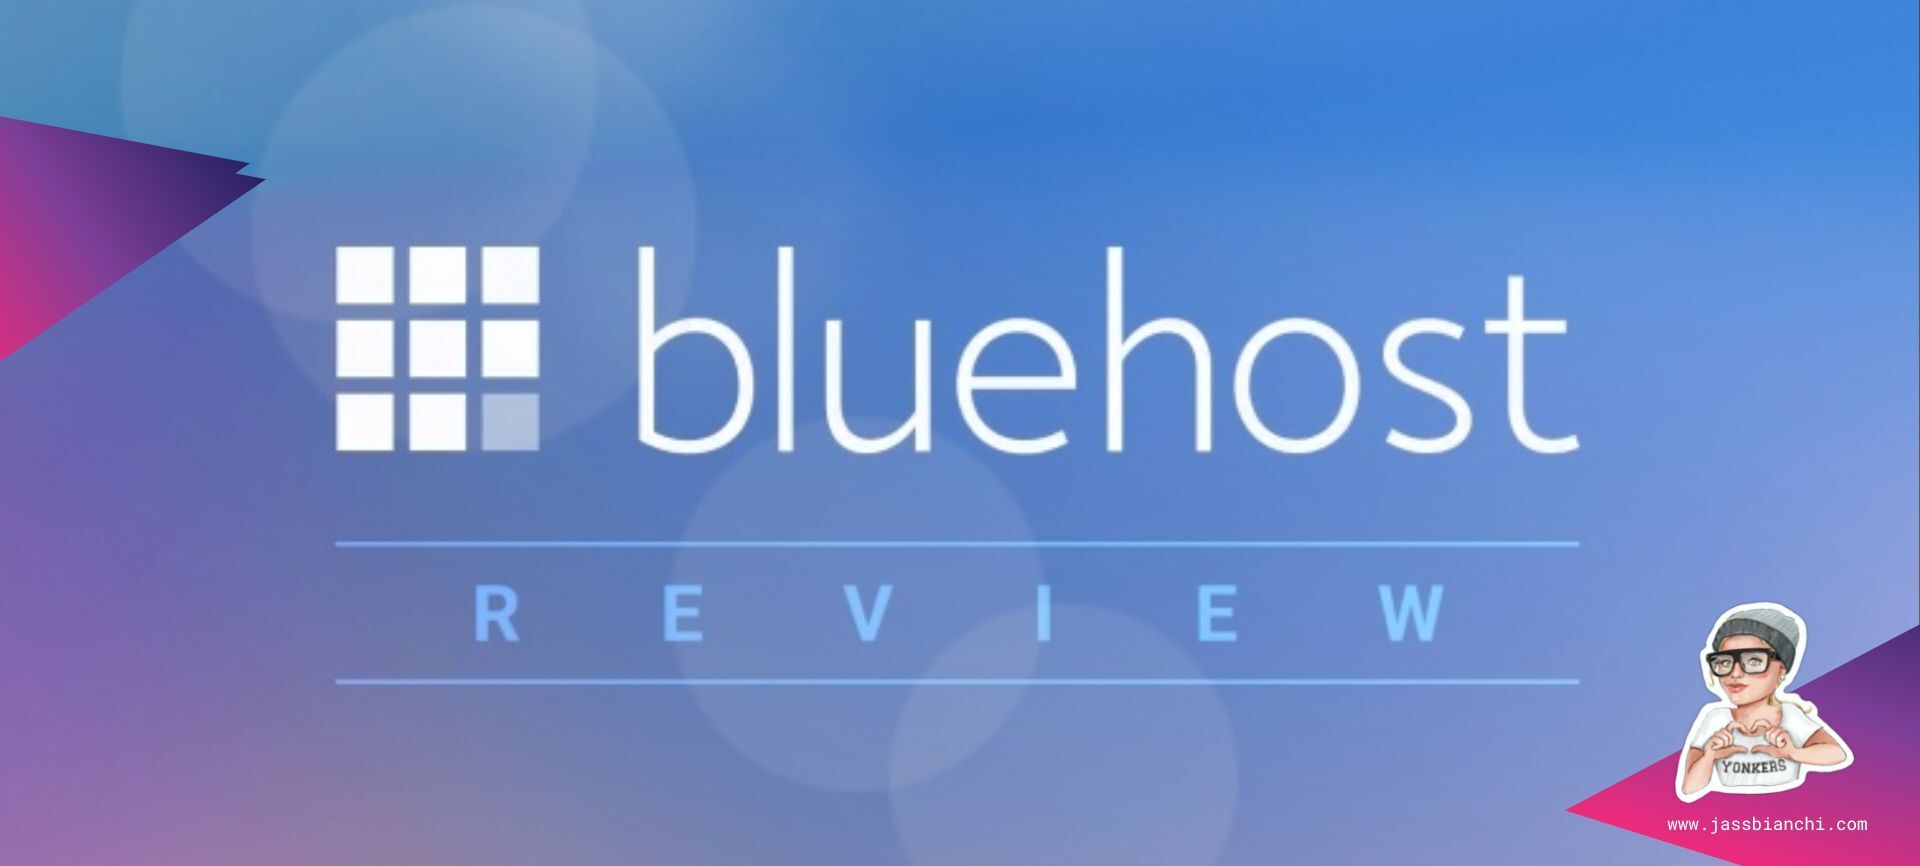 Finding the Perfect Web Hosting Company For Your Small Business in 2023: Why Bluehost? 